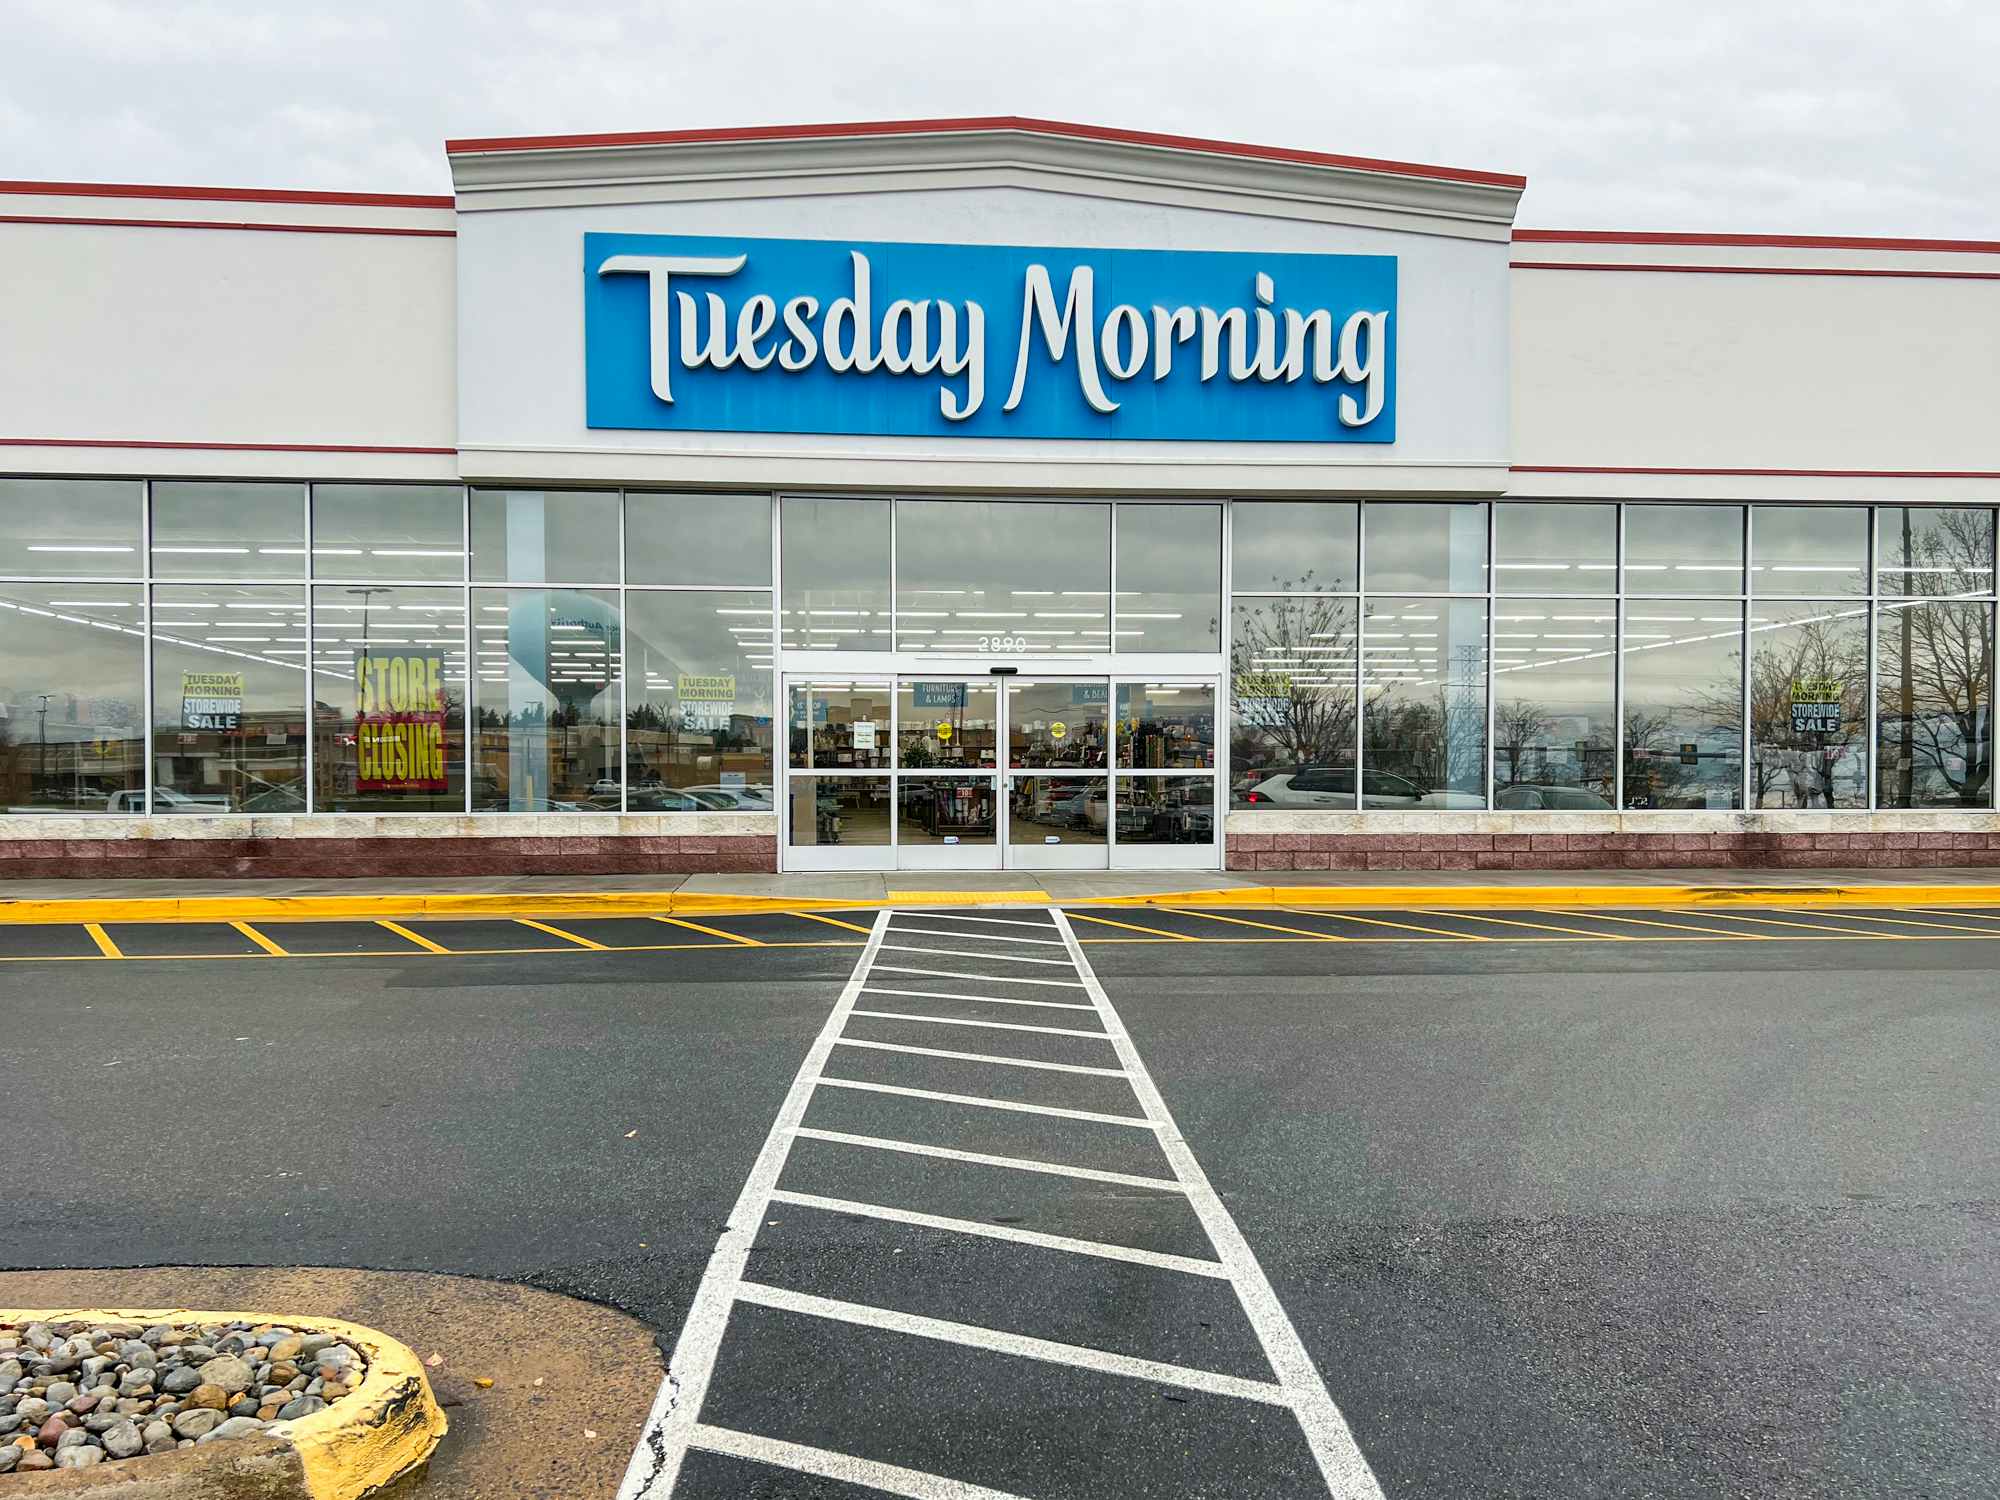 A Tuesday Morning store front